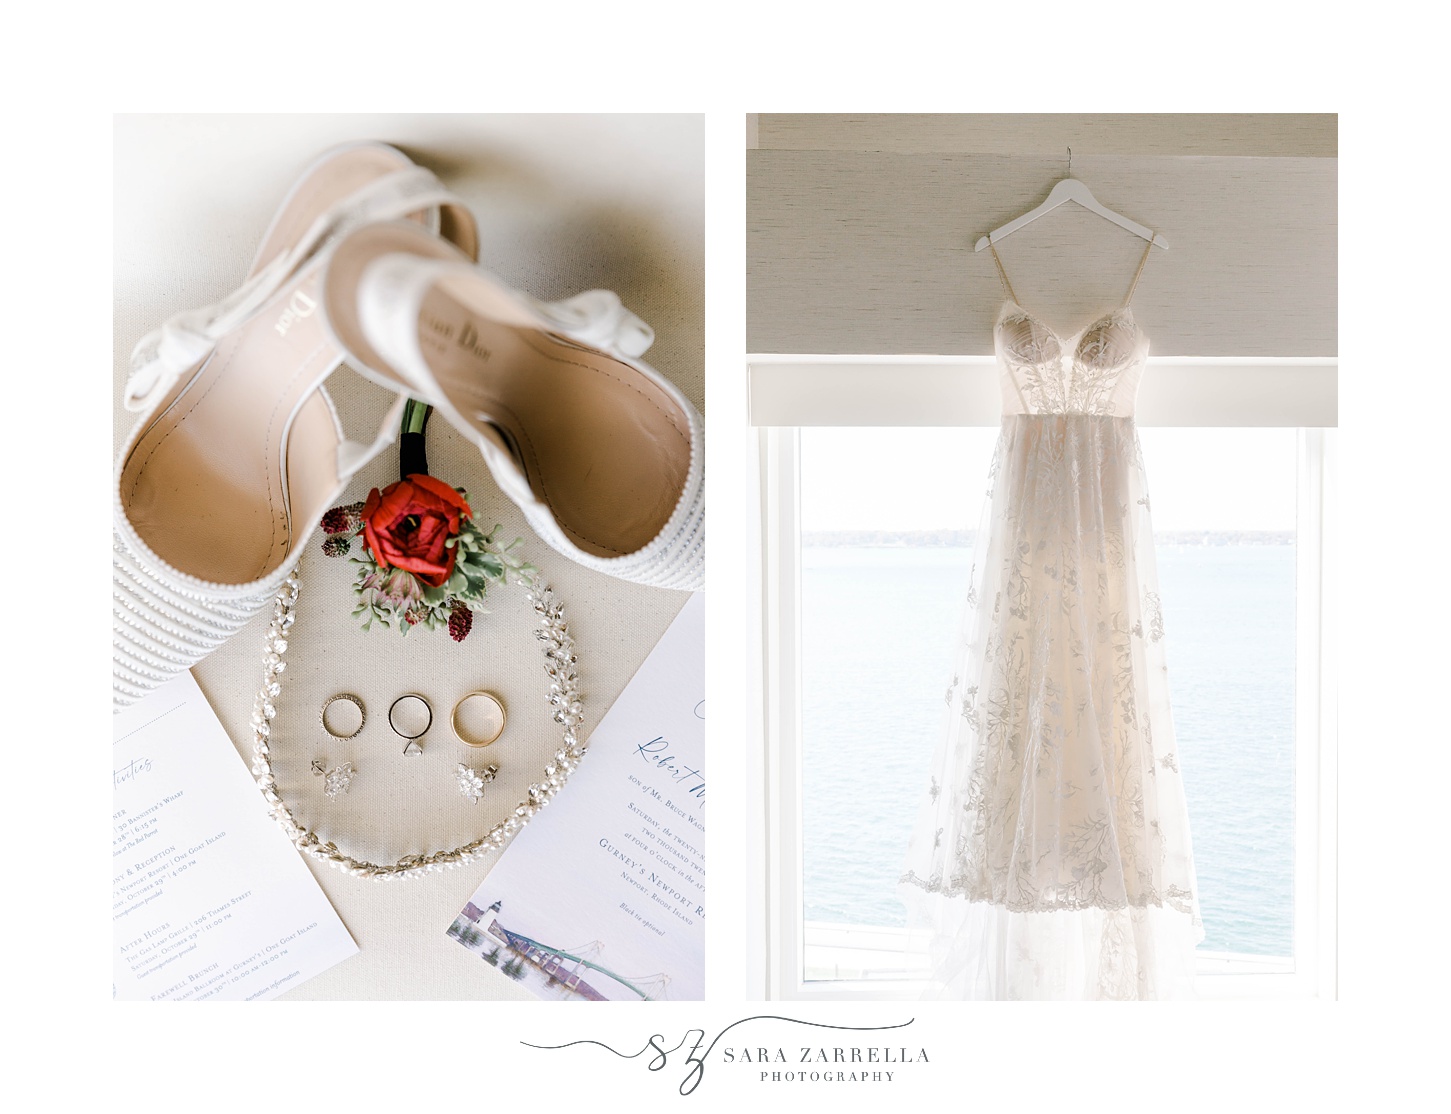 wedding dress with lace details hangs in window of bridal suite at Newport Harbor Island Resort